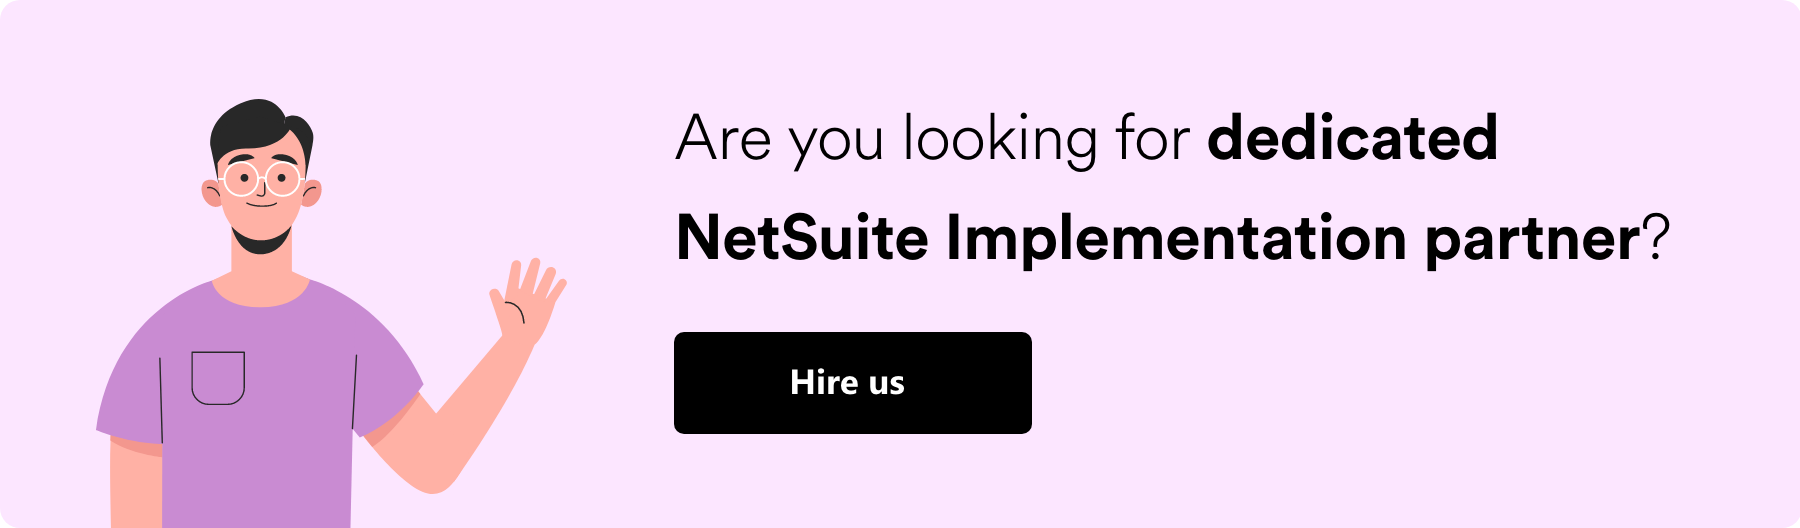 Contact Our NetSuite Implementation Partner